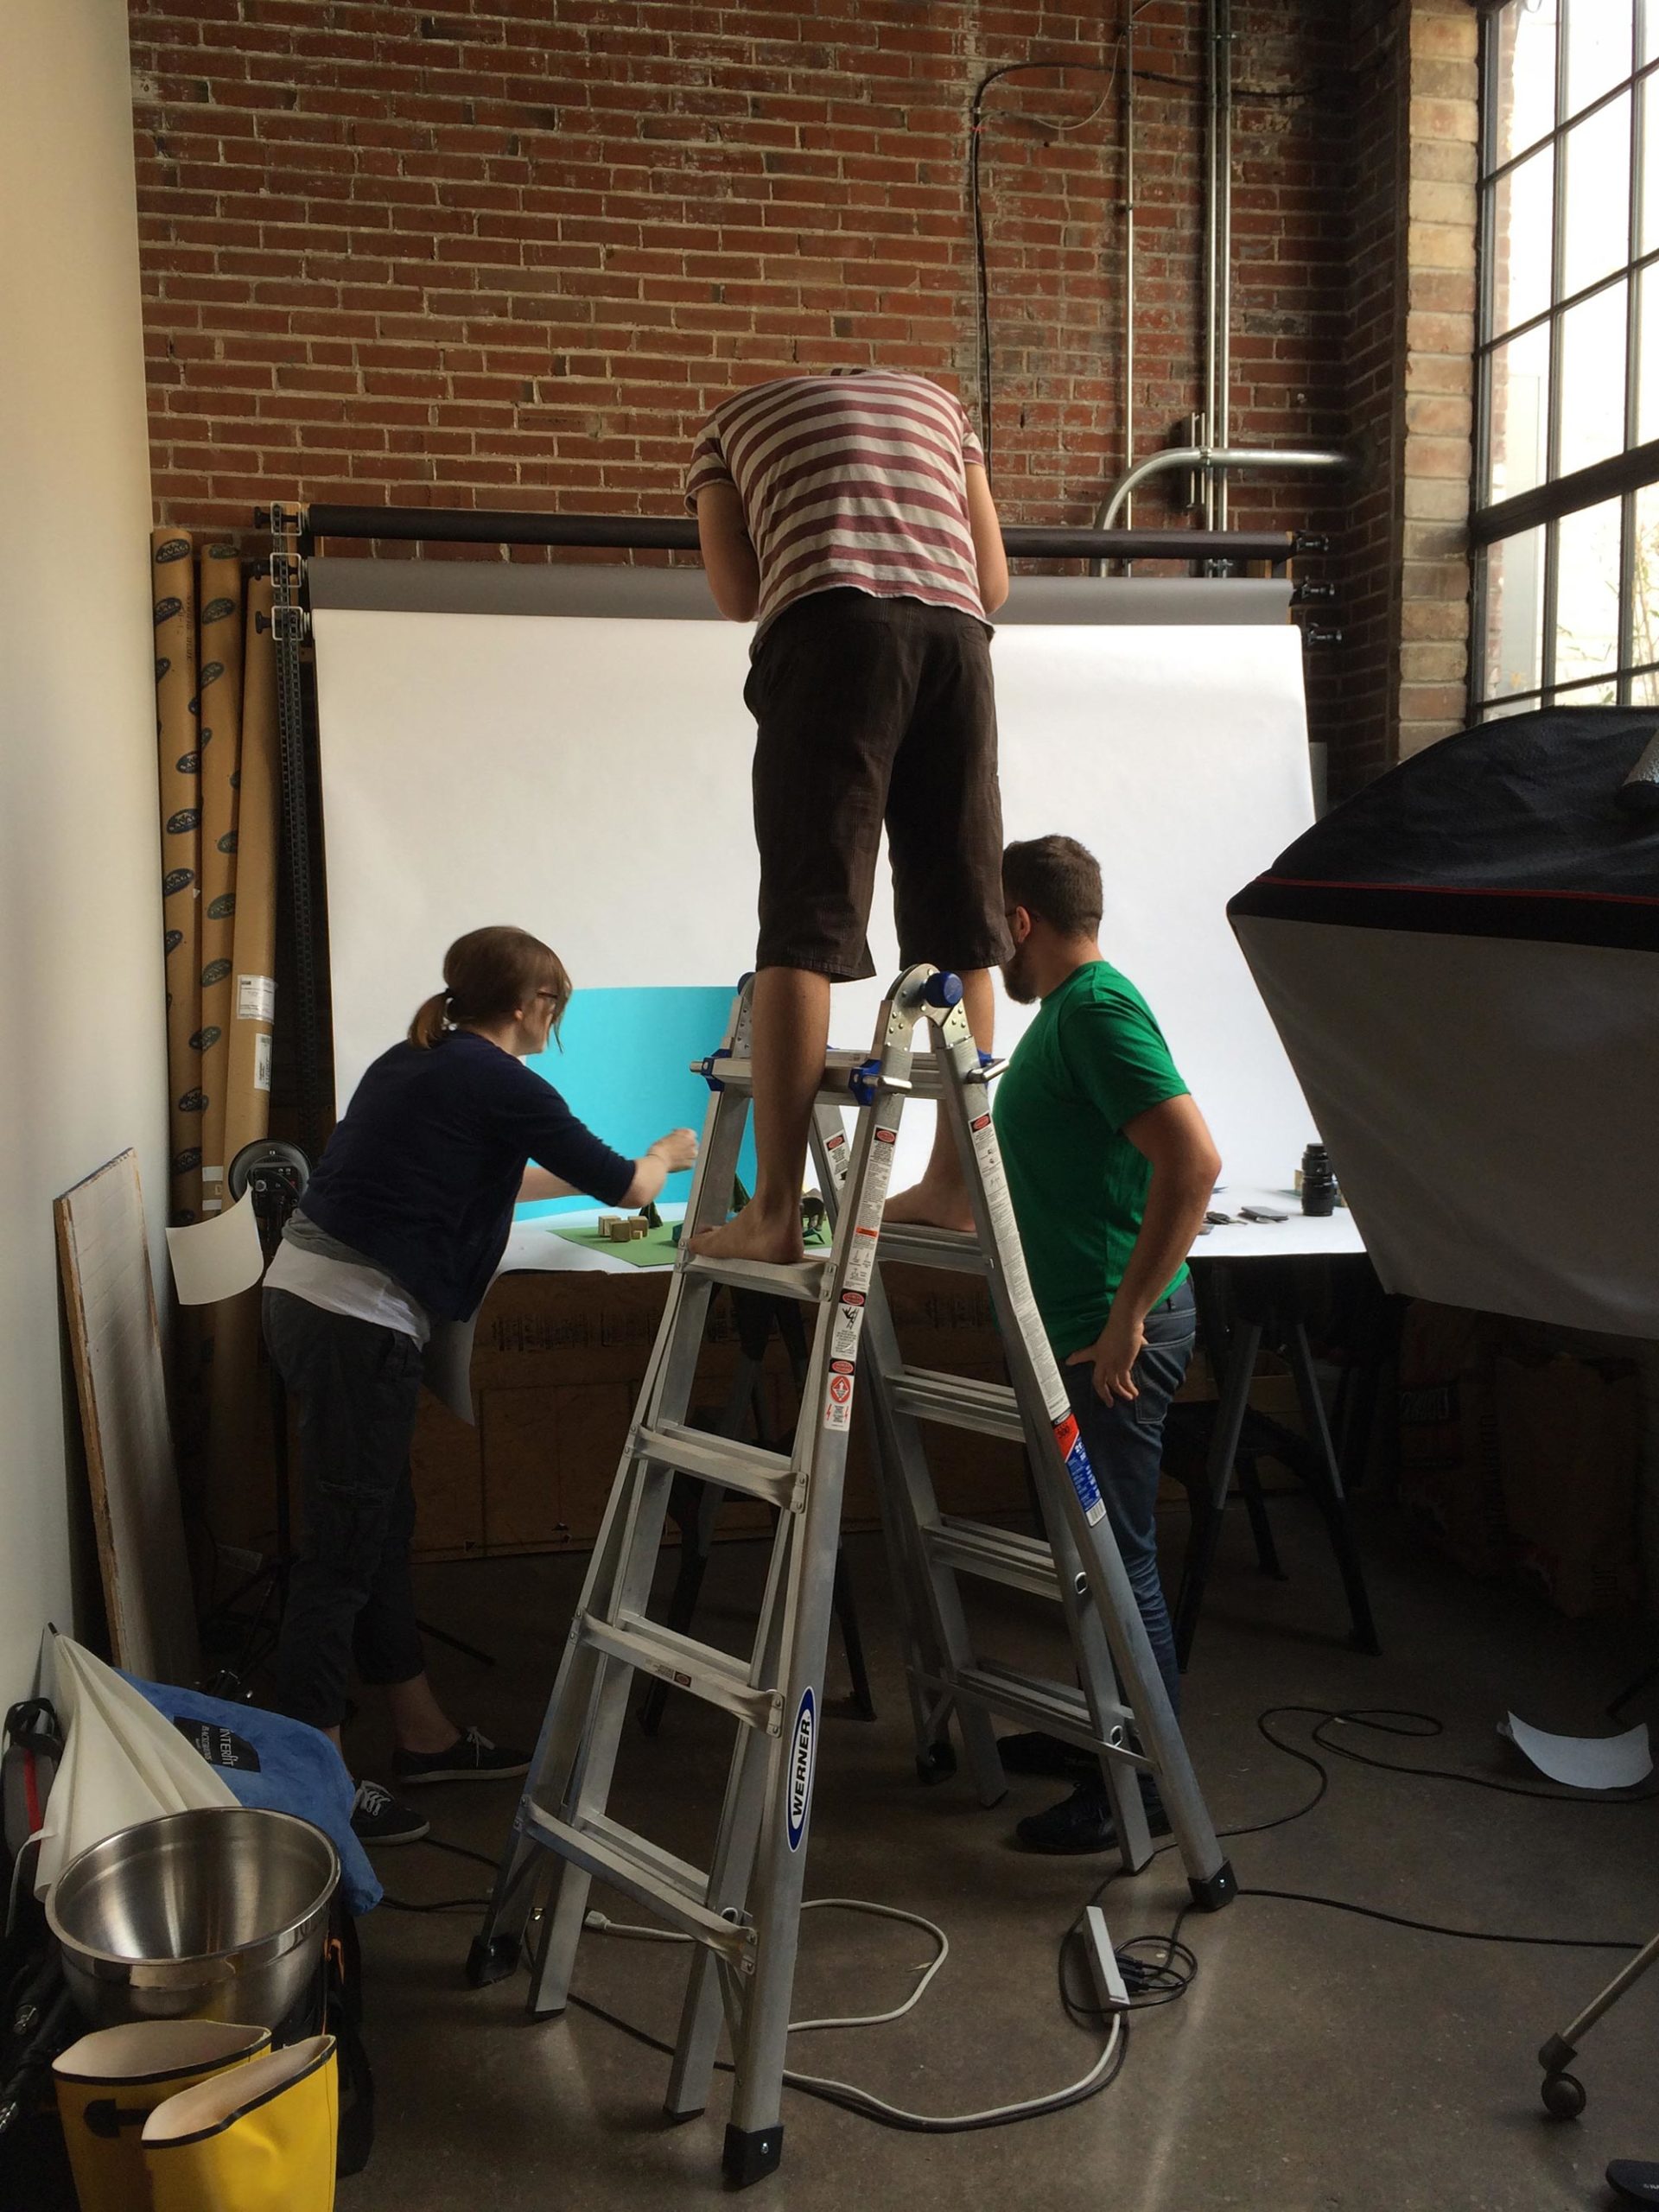 Atomicdust team photographing the Annual Report for the St. Louis Zoo